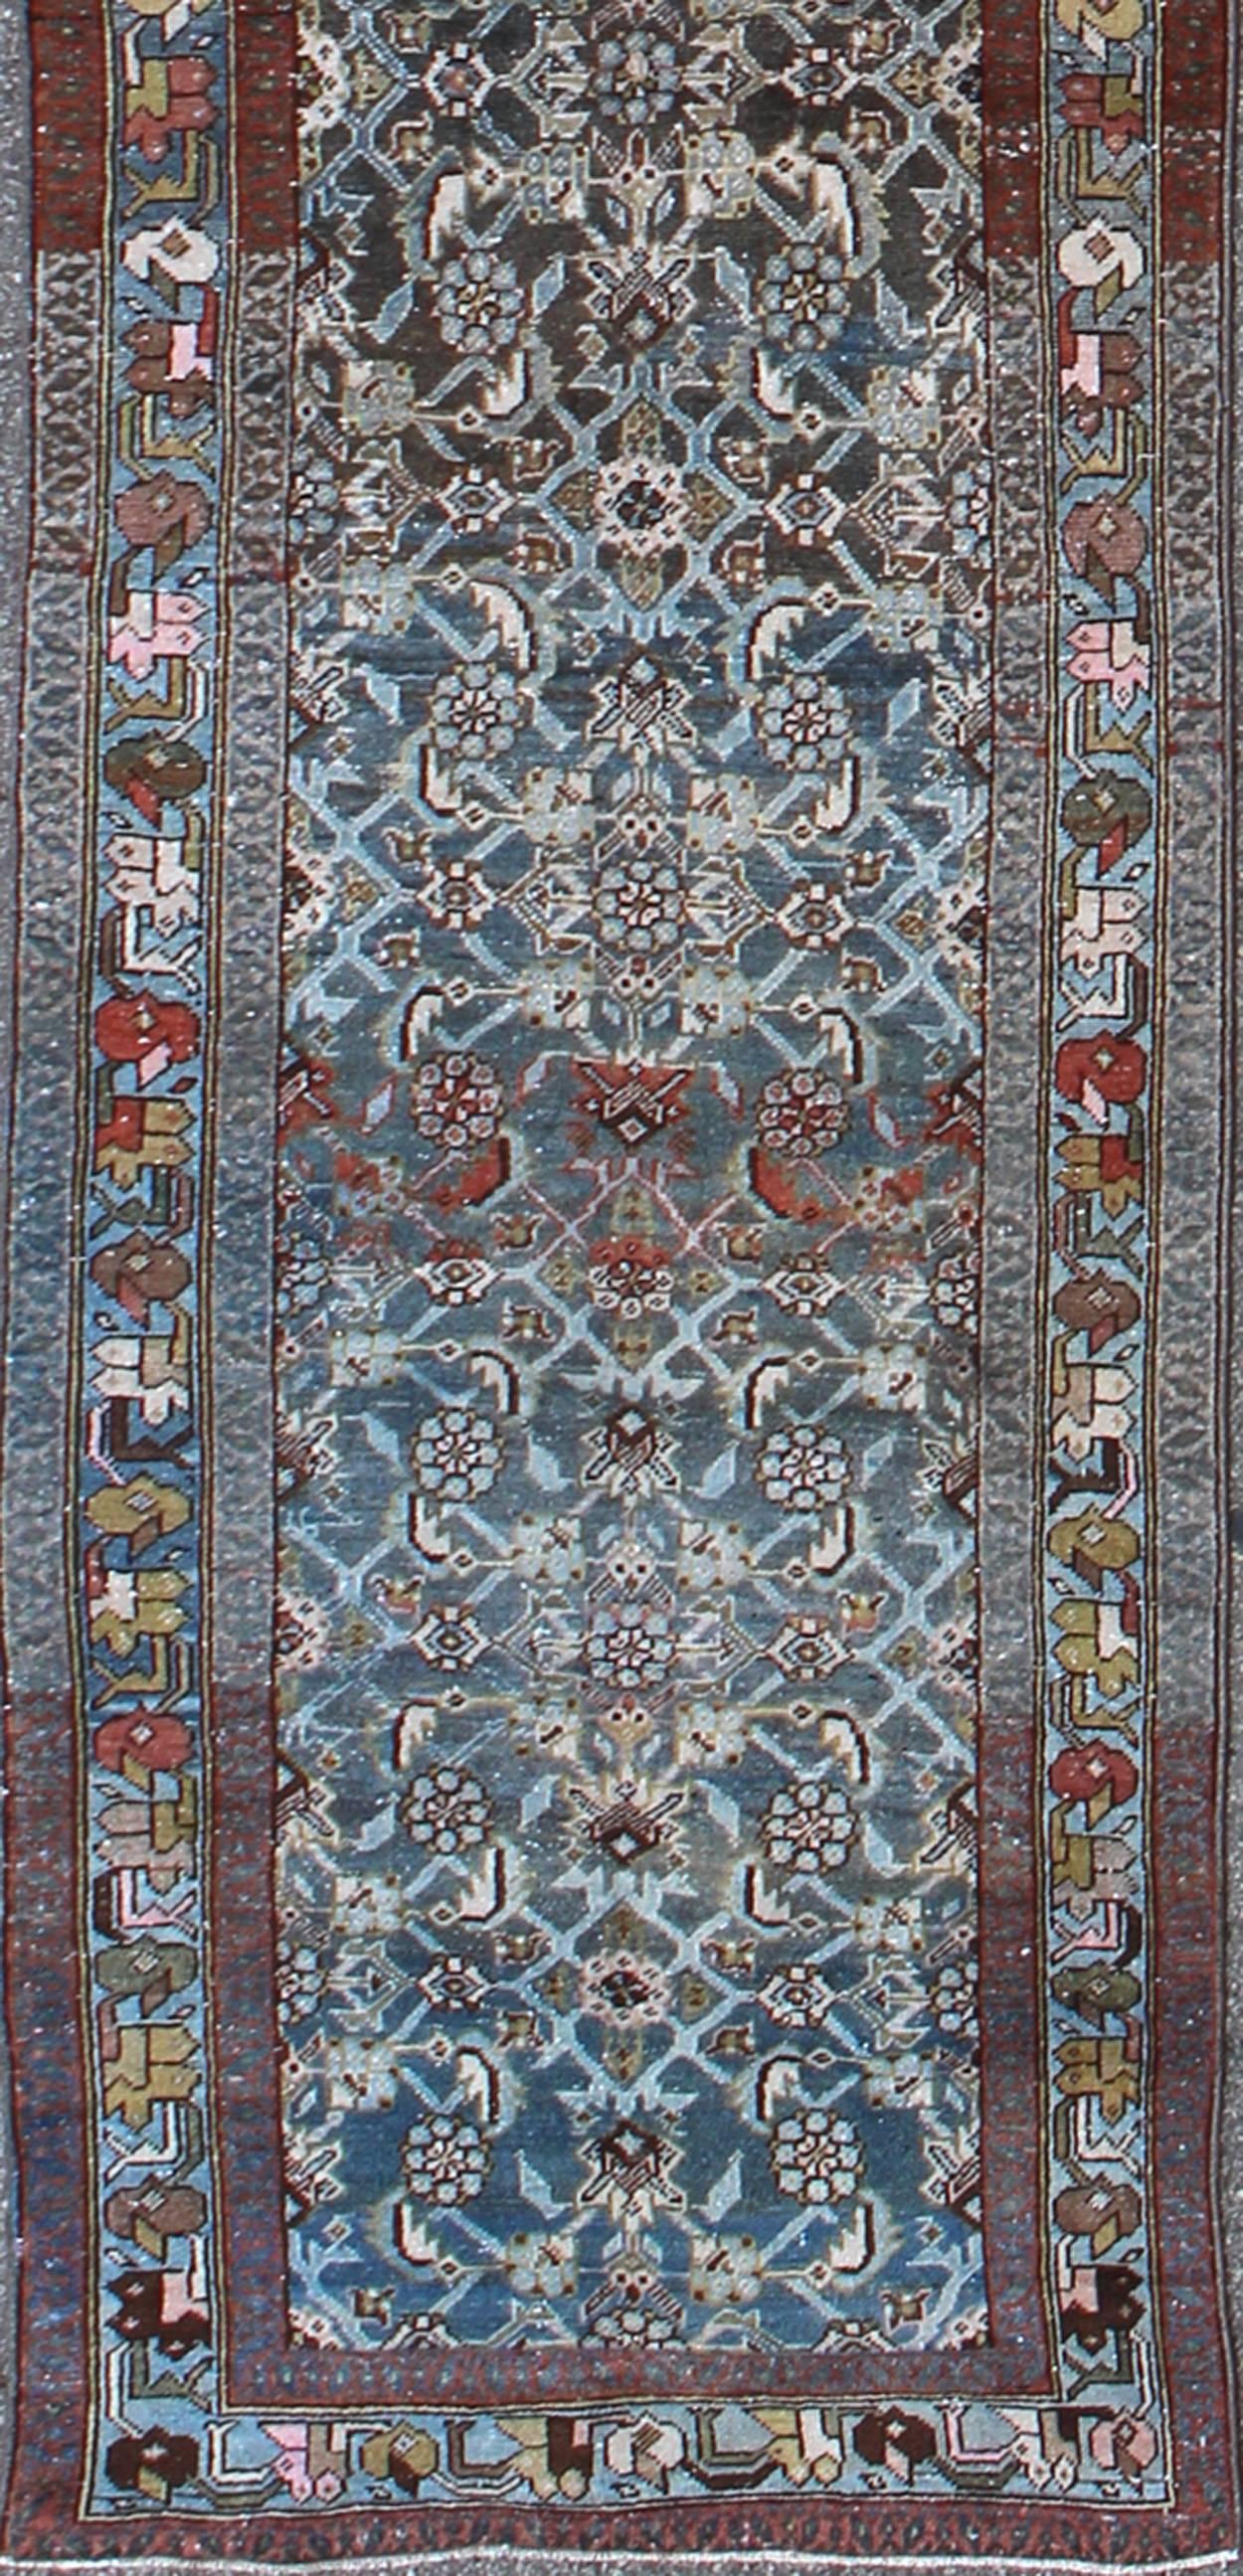 Very Long Kurdish Runner with Dark/Light Blue, Red and Taupe 
sus-259

This Kurdish tribal rug was woven by Kurdish weavers in western Persia in the early 20th century. Often they used this repeating latch-hook design in the border, woven along in